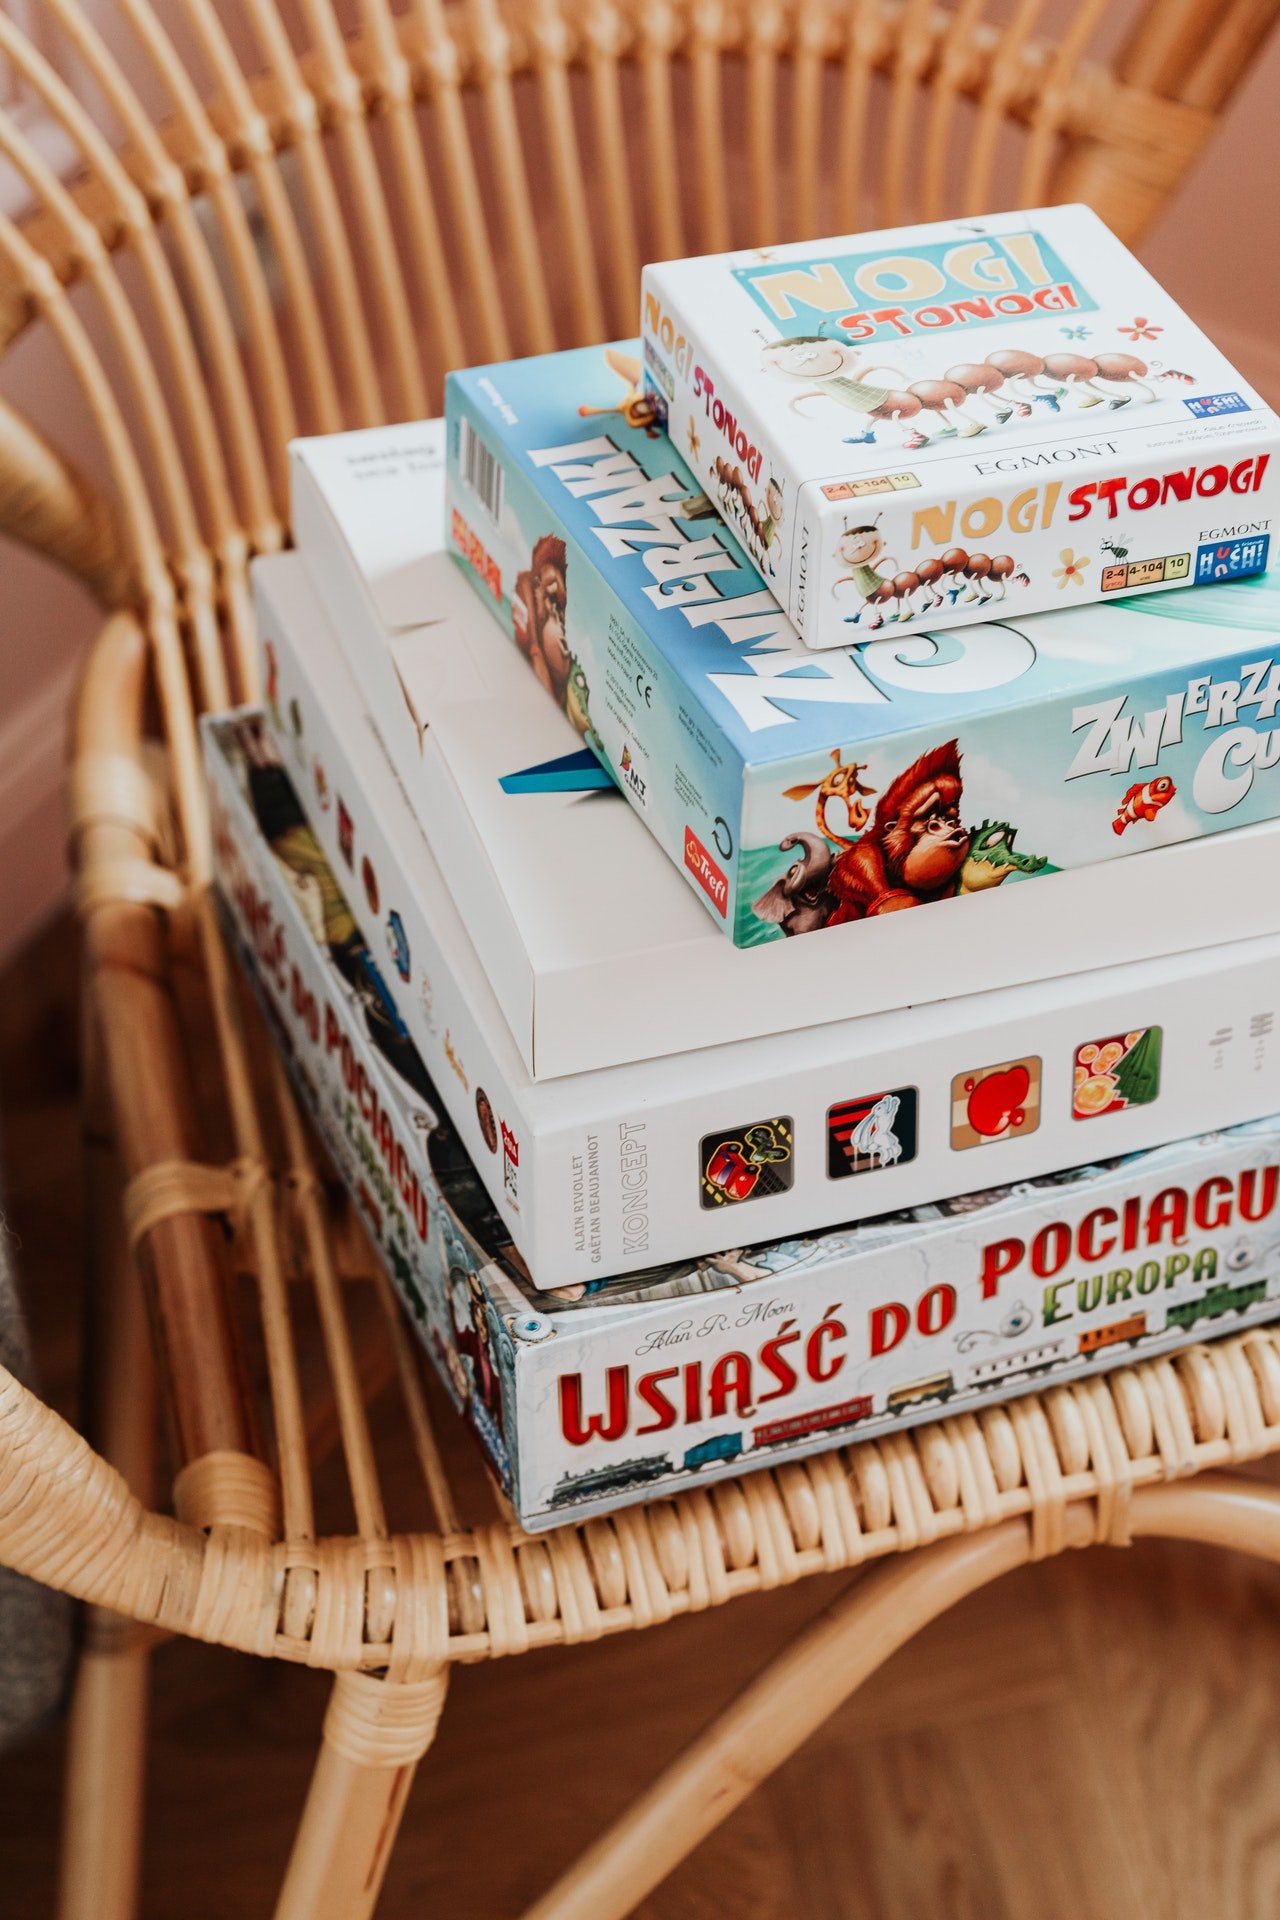 Bob gathered all the board games in his house. | Source: Pexels